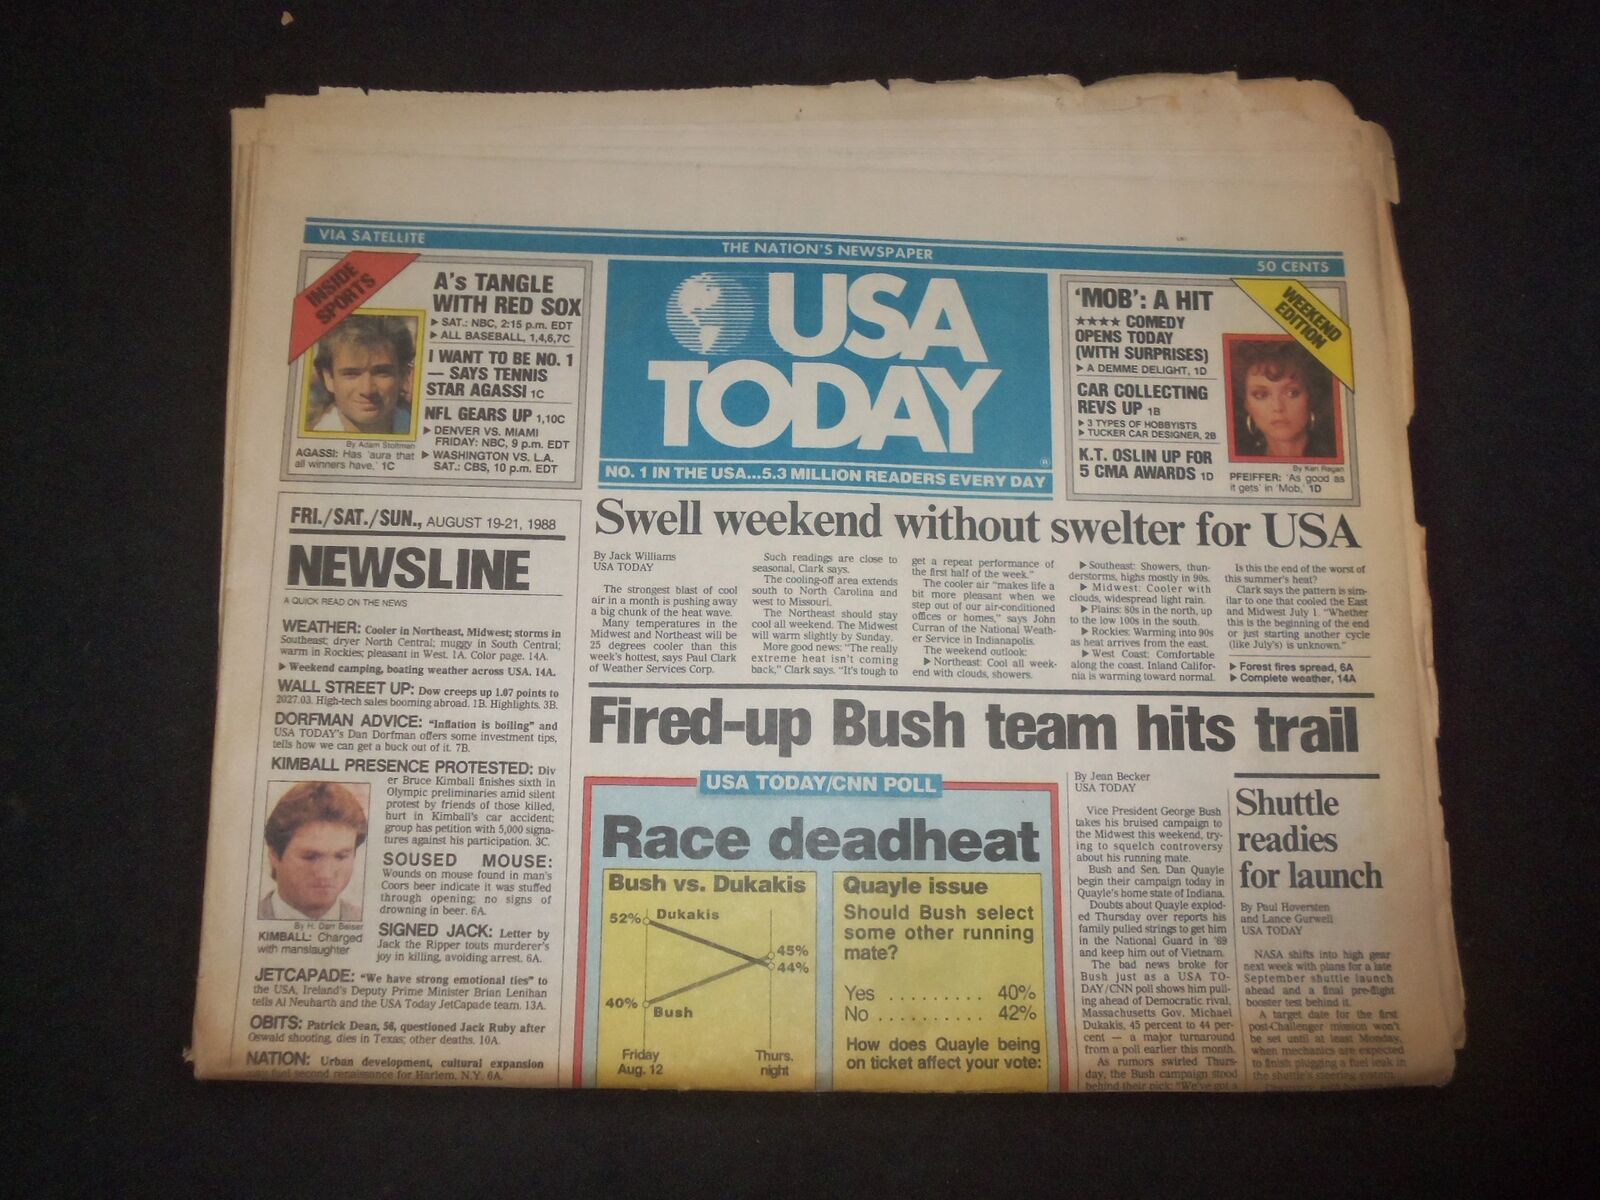 1988 AUGUST 19-21 USA TODAY NEWSPAPER - FIRED-UP BUSH TEAM HITS TRAIL - NP 7769